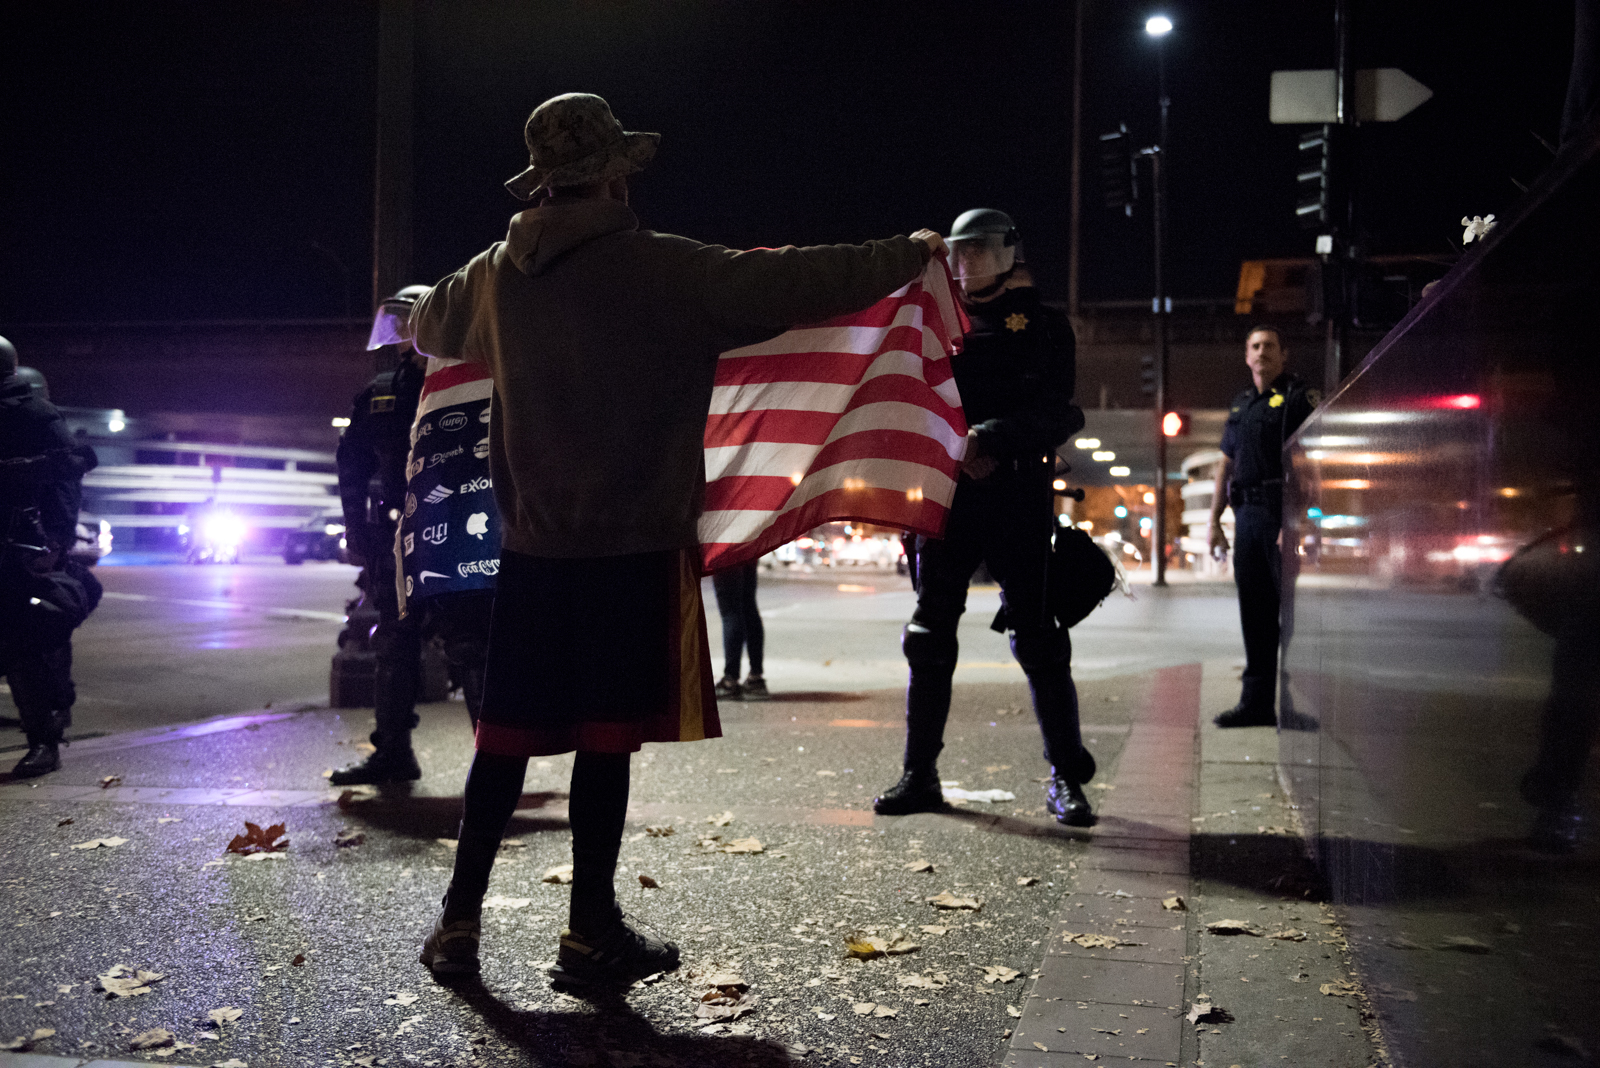  A protester stands in front of a police line on Broadway, near Interstate 880, in Oakland on Friday, October 11, 2016. | Rosa Furneaux/Oakland North 